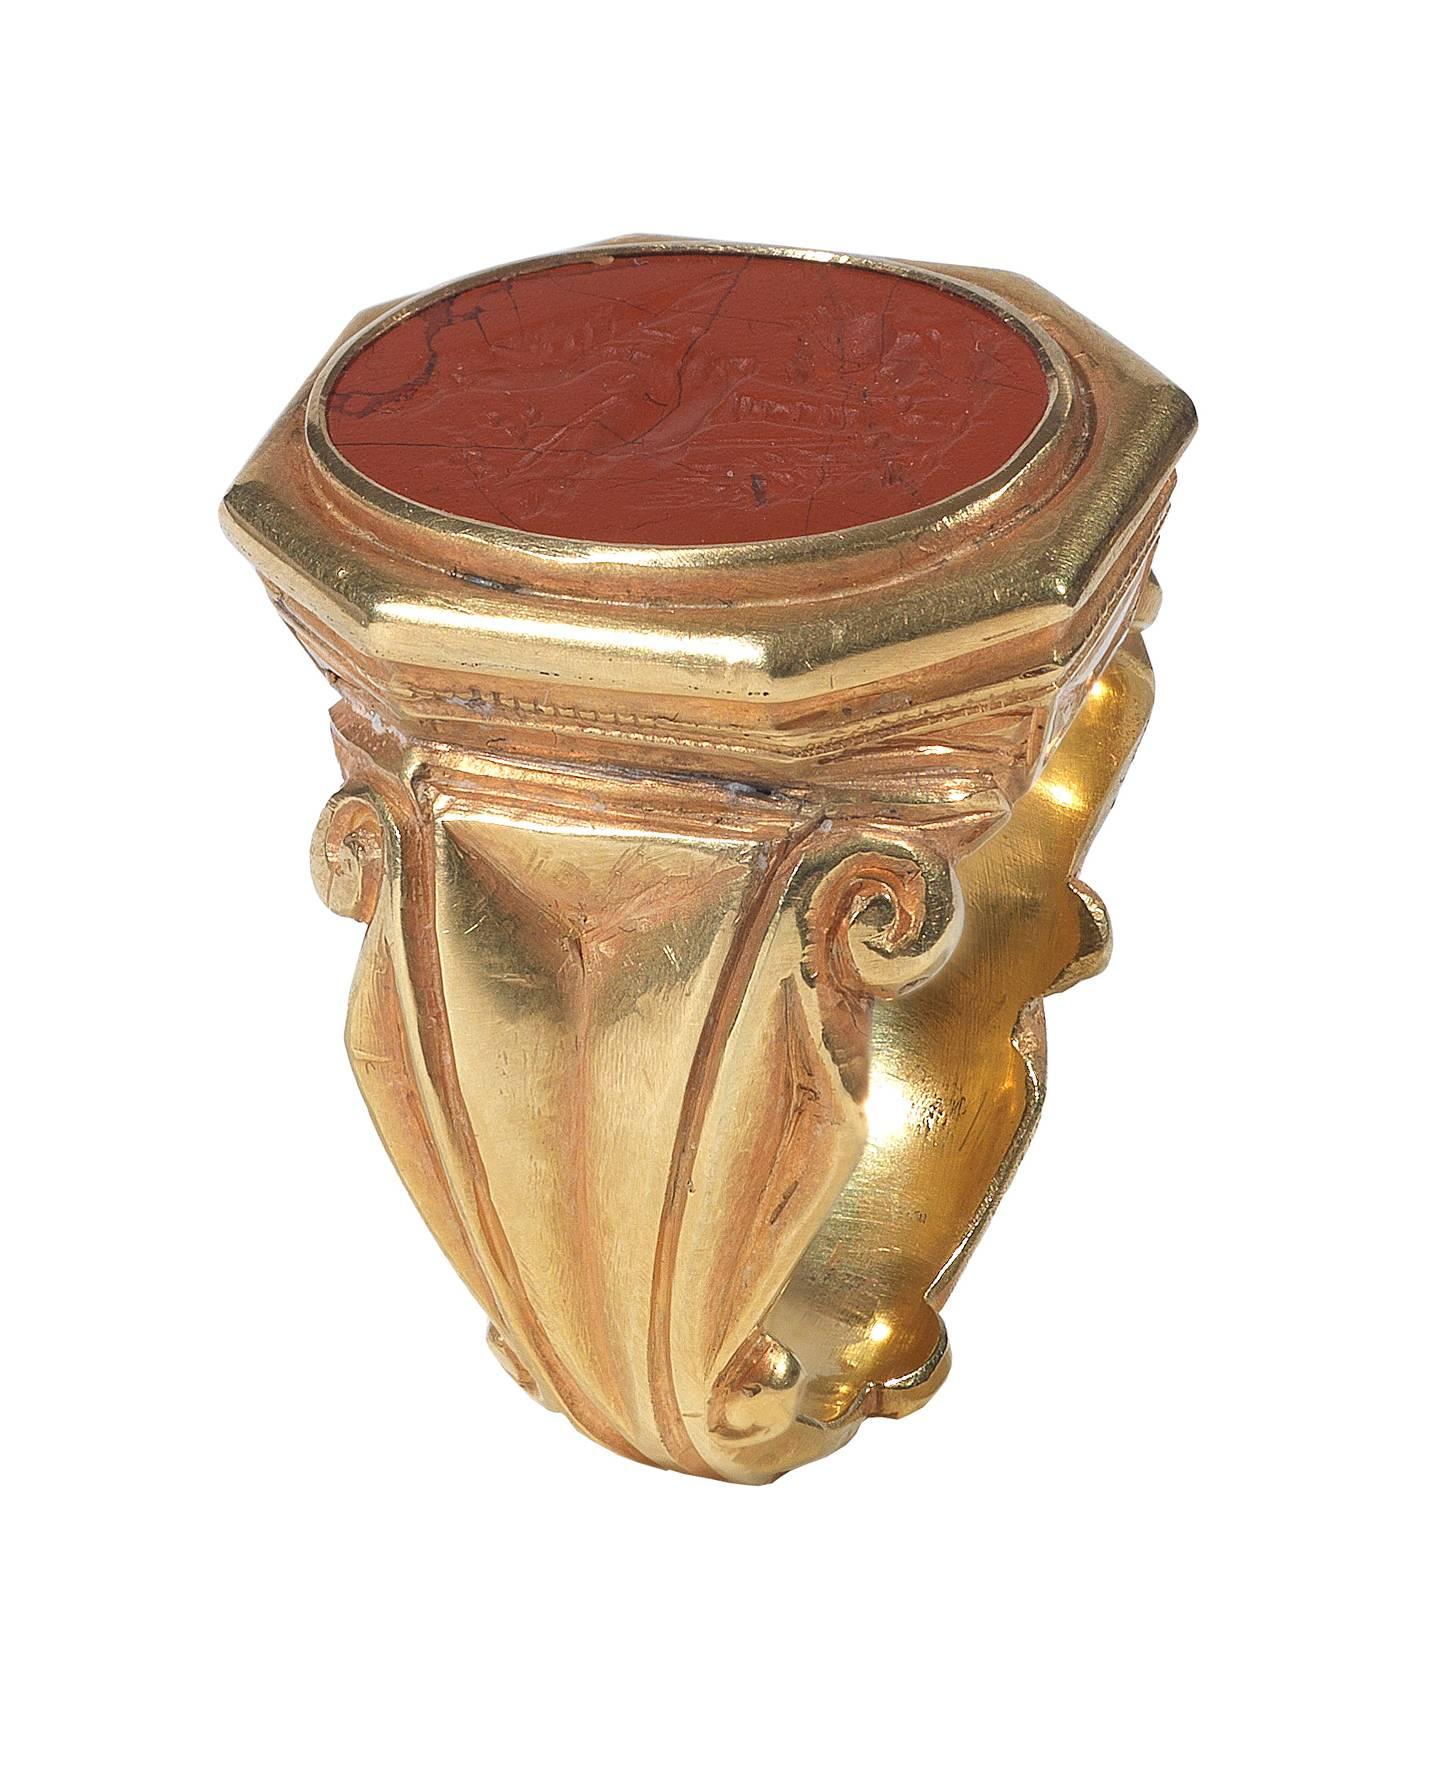 BERNARDO ANTICHITÀ PONTE VECCHIO FLORENCE

The 3rd century oval red jasper depicting the head of Fortuna, a corn ear and a bird on a cup, all classic depictions to symbolize fertility, luck and prosperity. 

These kind of rings was very popular in